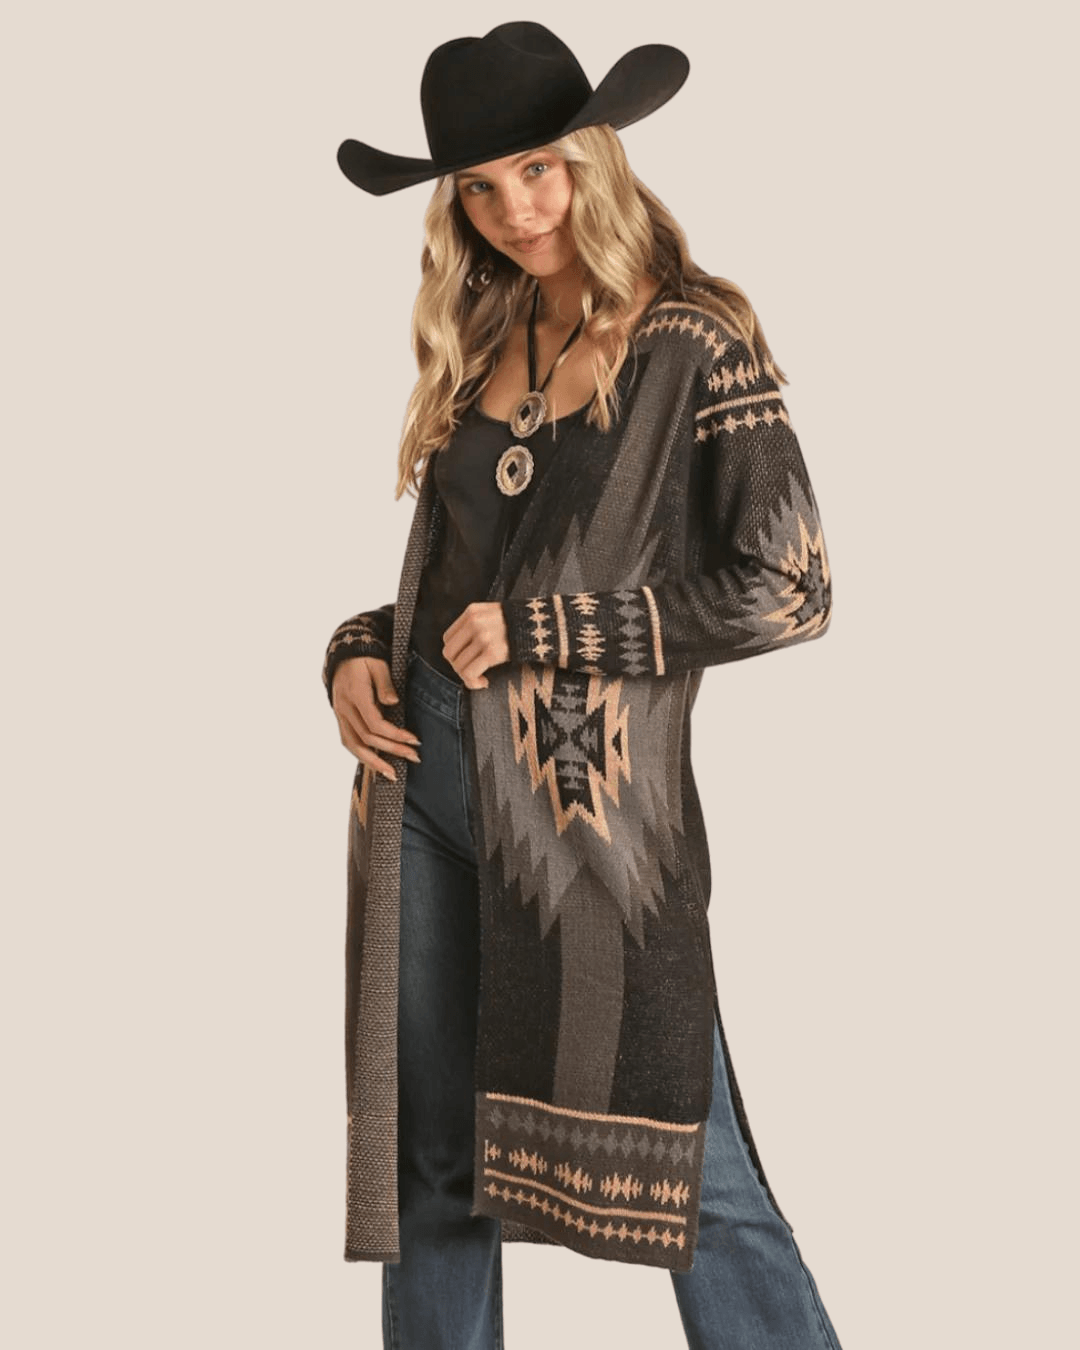 Women’s Western Sweaters, Dusters, and Cardigans - Painted Cowgirl Western Store